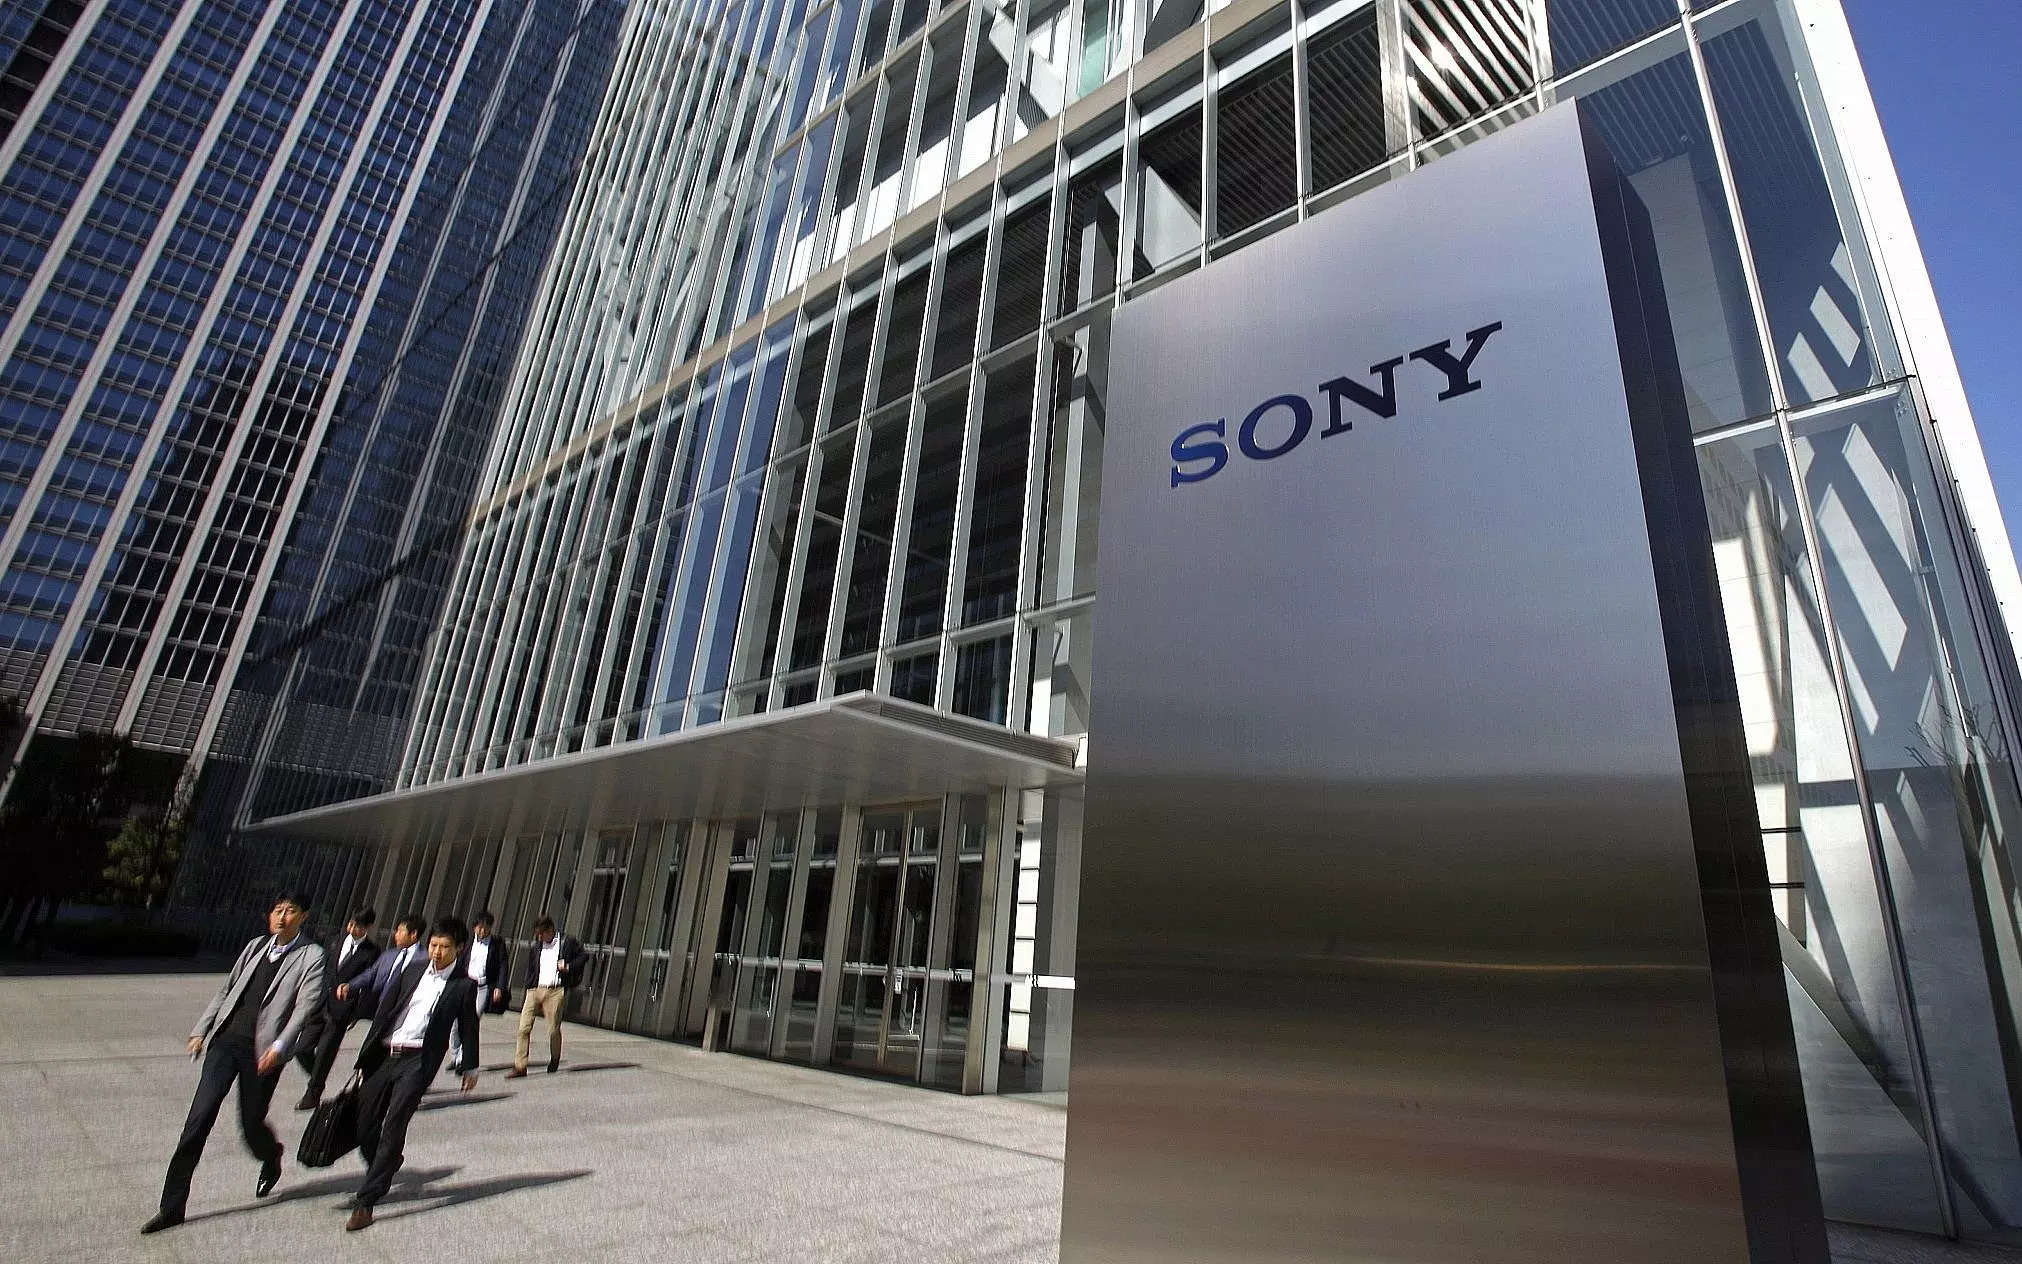  The primary goal of Sony-branded cars, analysts say, is to create an autonomous connected vehicle for services such as car sharing and ride hailing, which could eventually outstrip automobile sales.